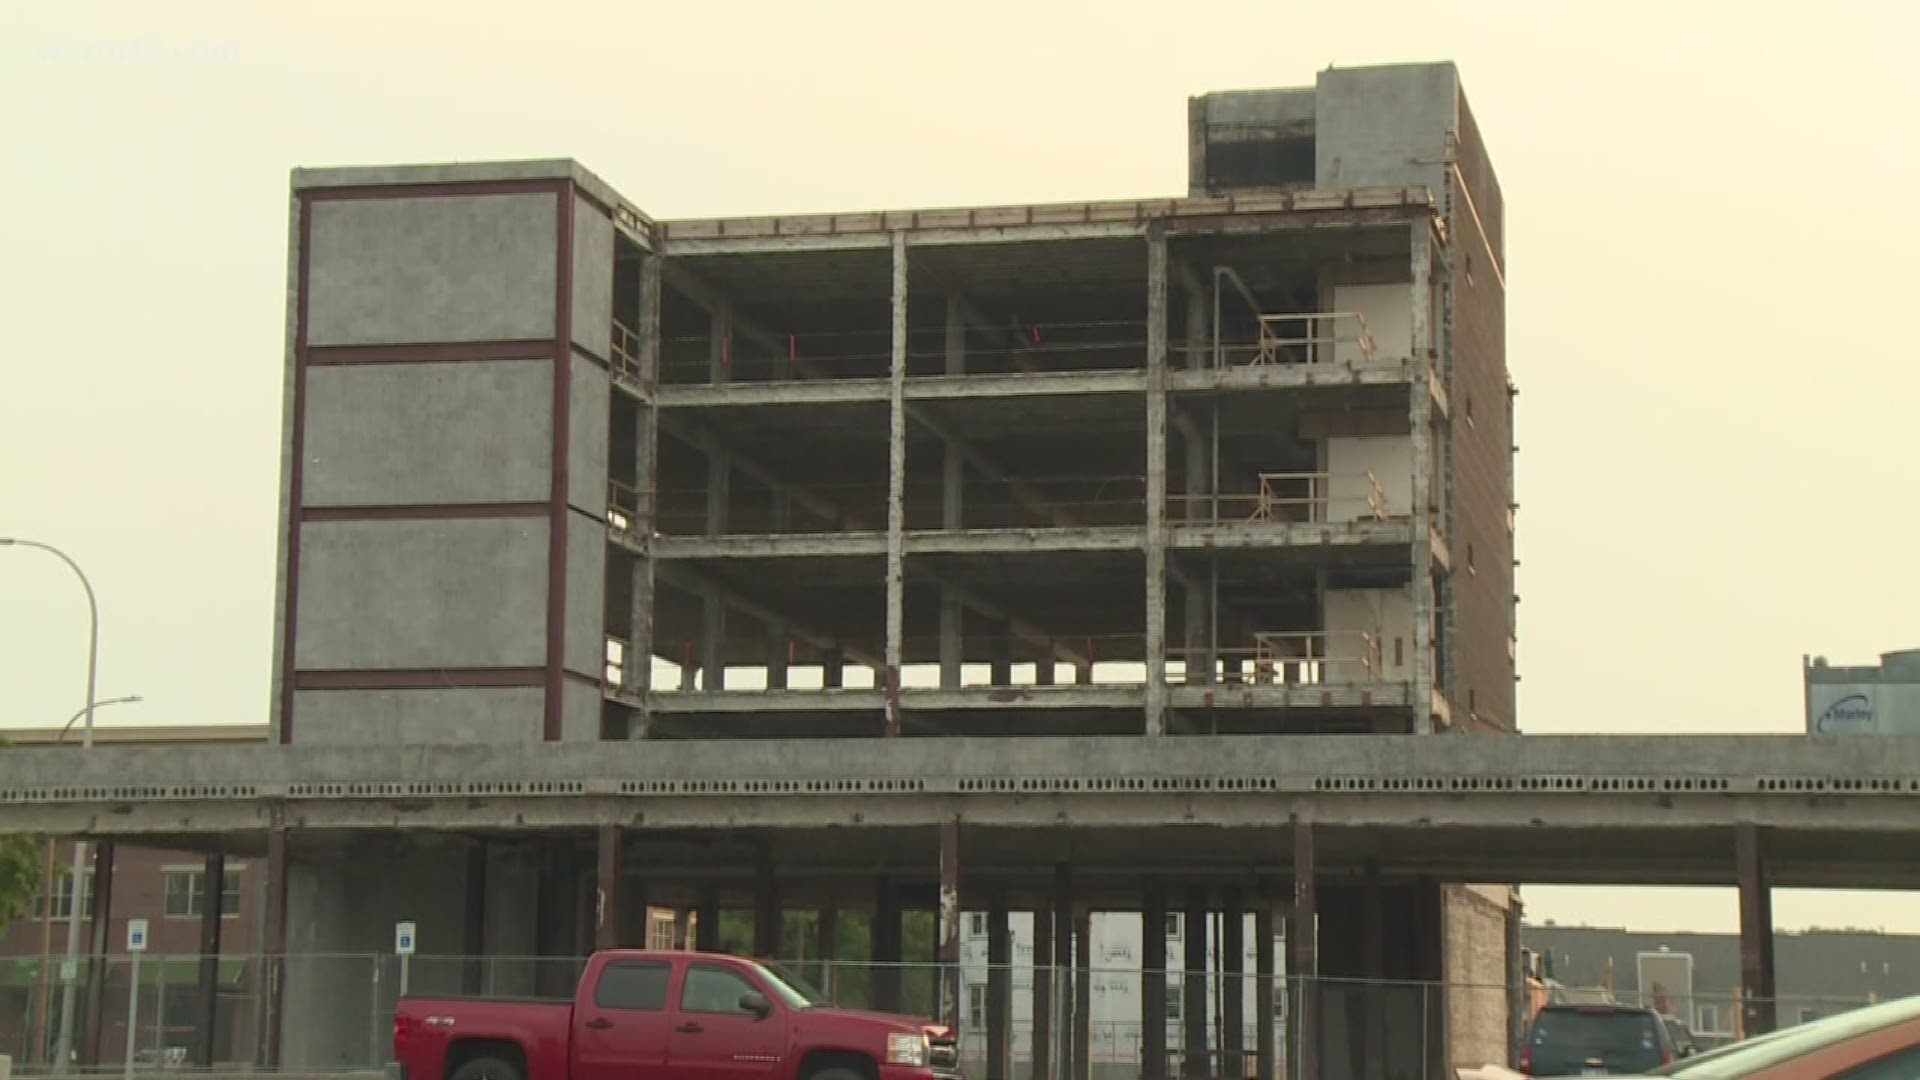 The downtown rebirth continues in Muskegon